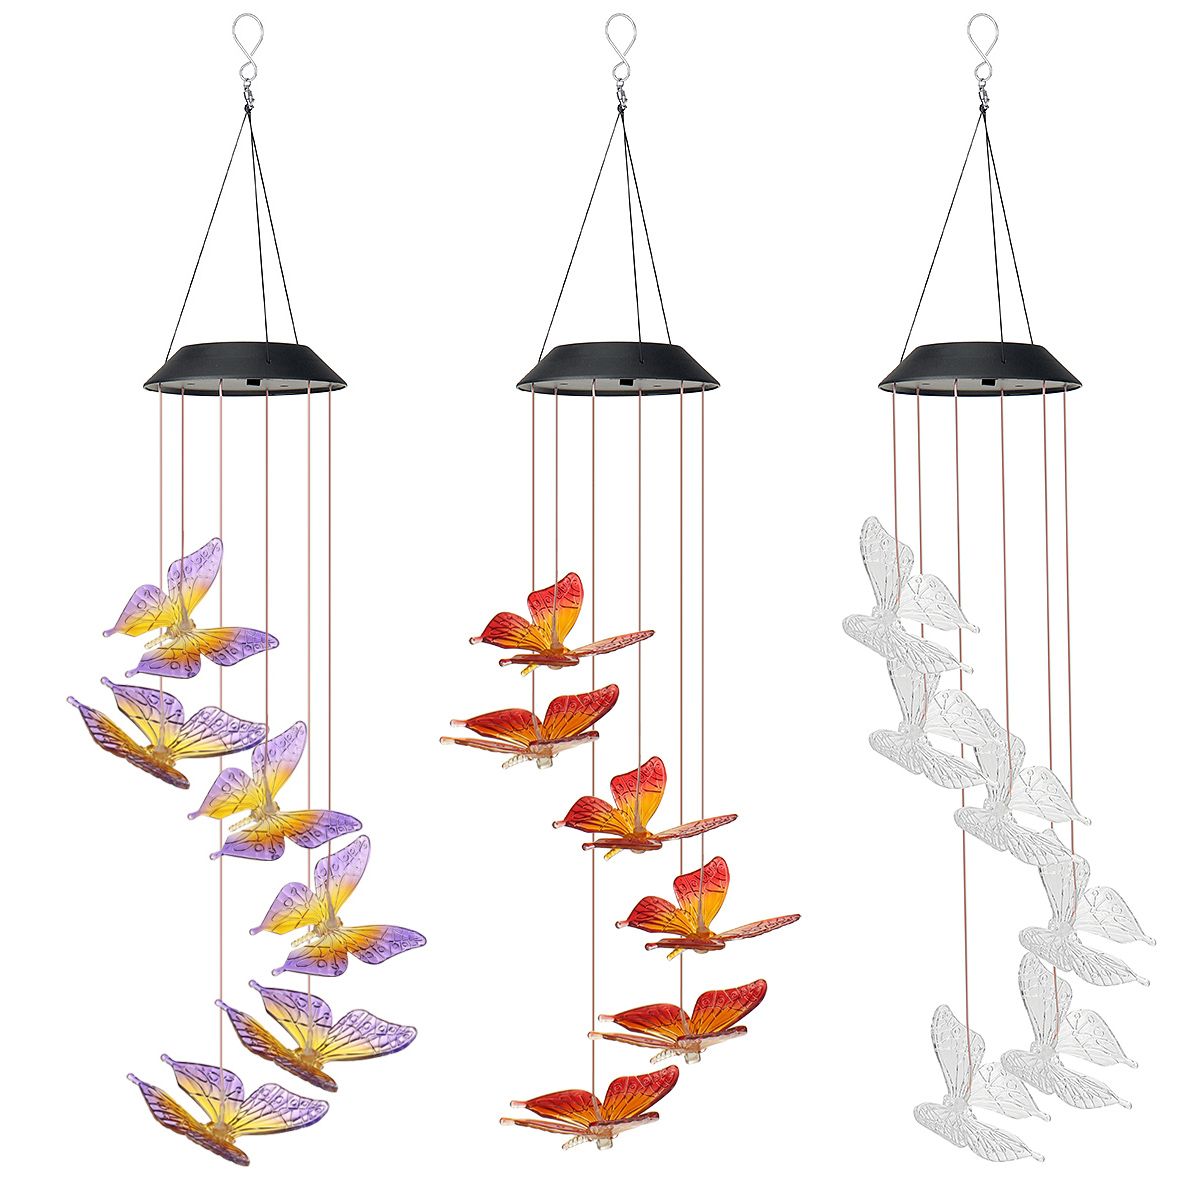 Color-Changing-LED-Solar-Light-Outdoor-Hummingbird-Wind-Chime-Lamp-Yard-Garden-Decor-1711992